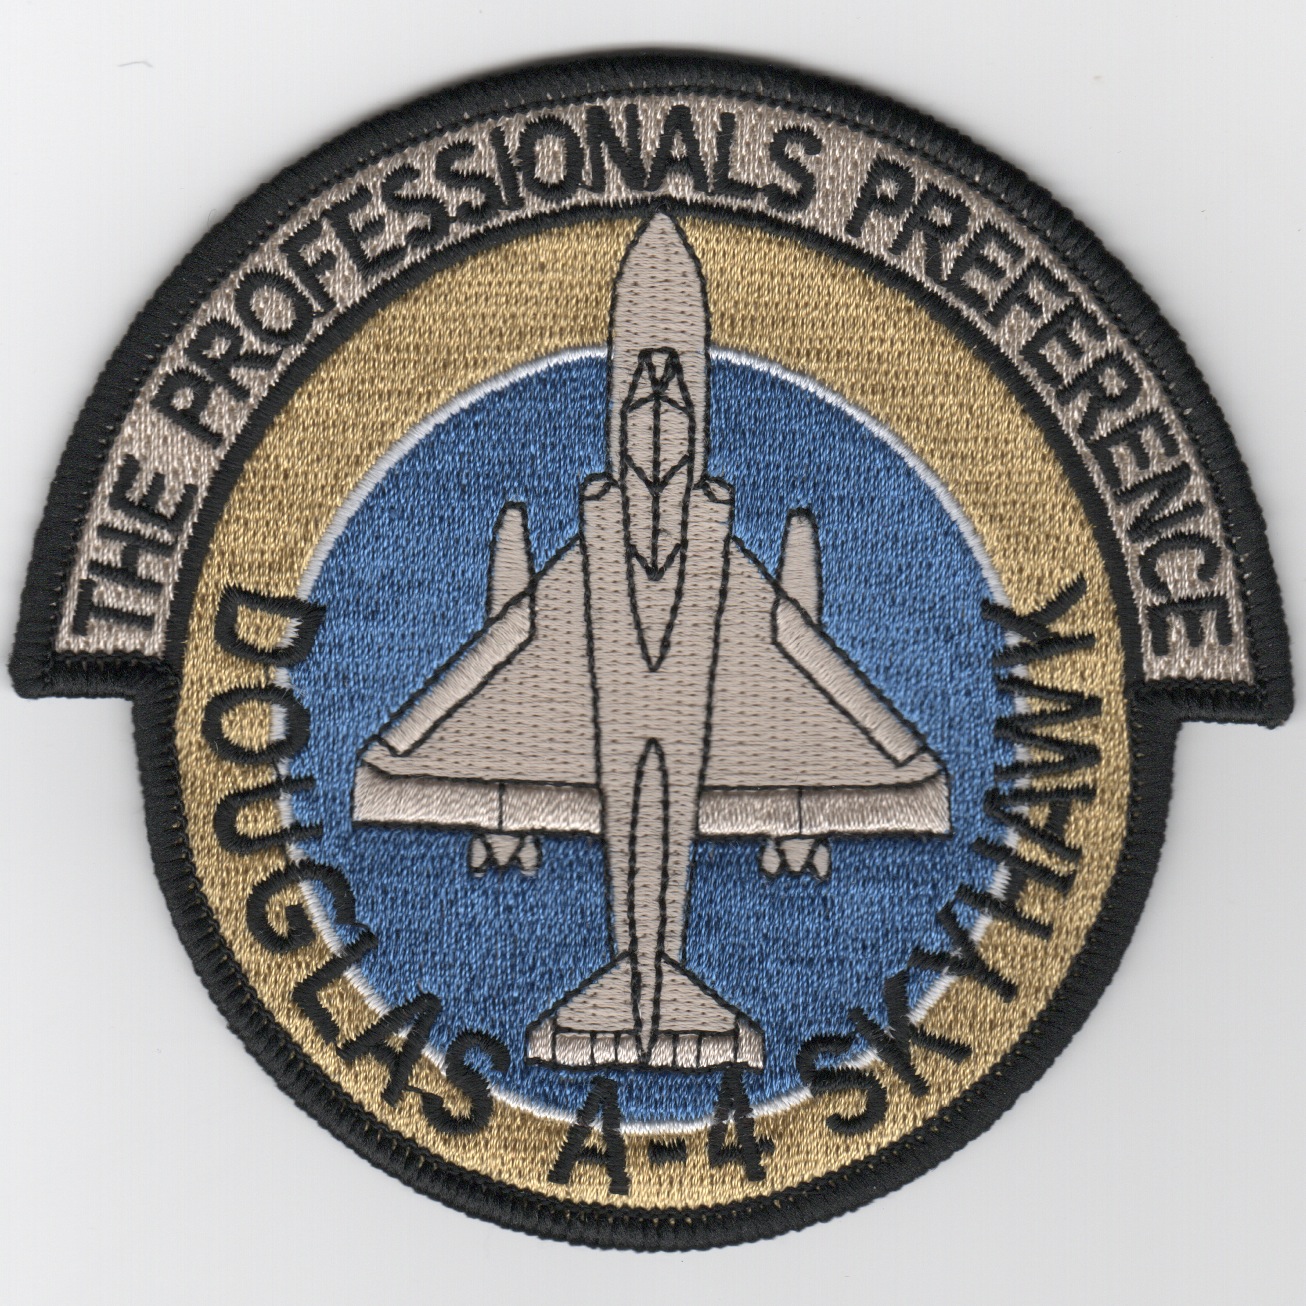 A-4 'Professionals Preference' Patch